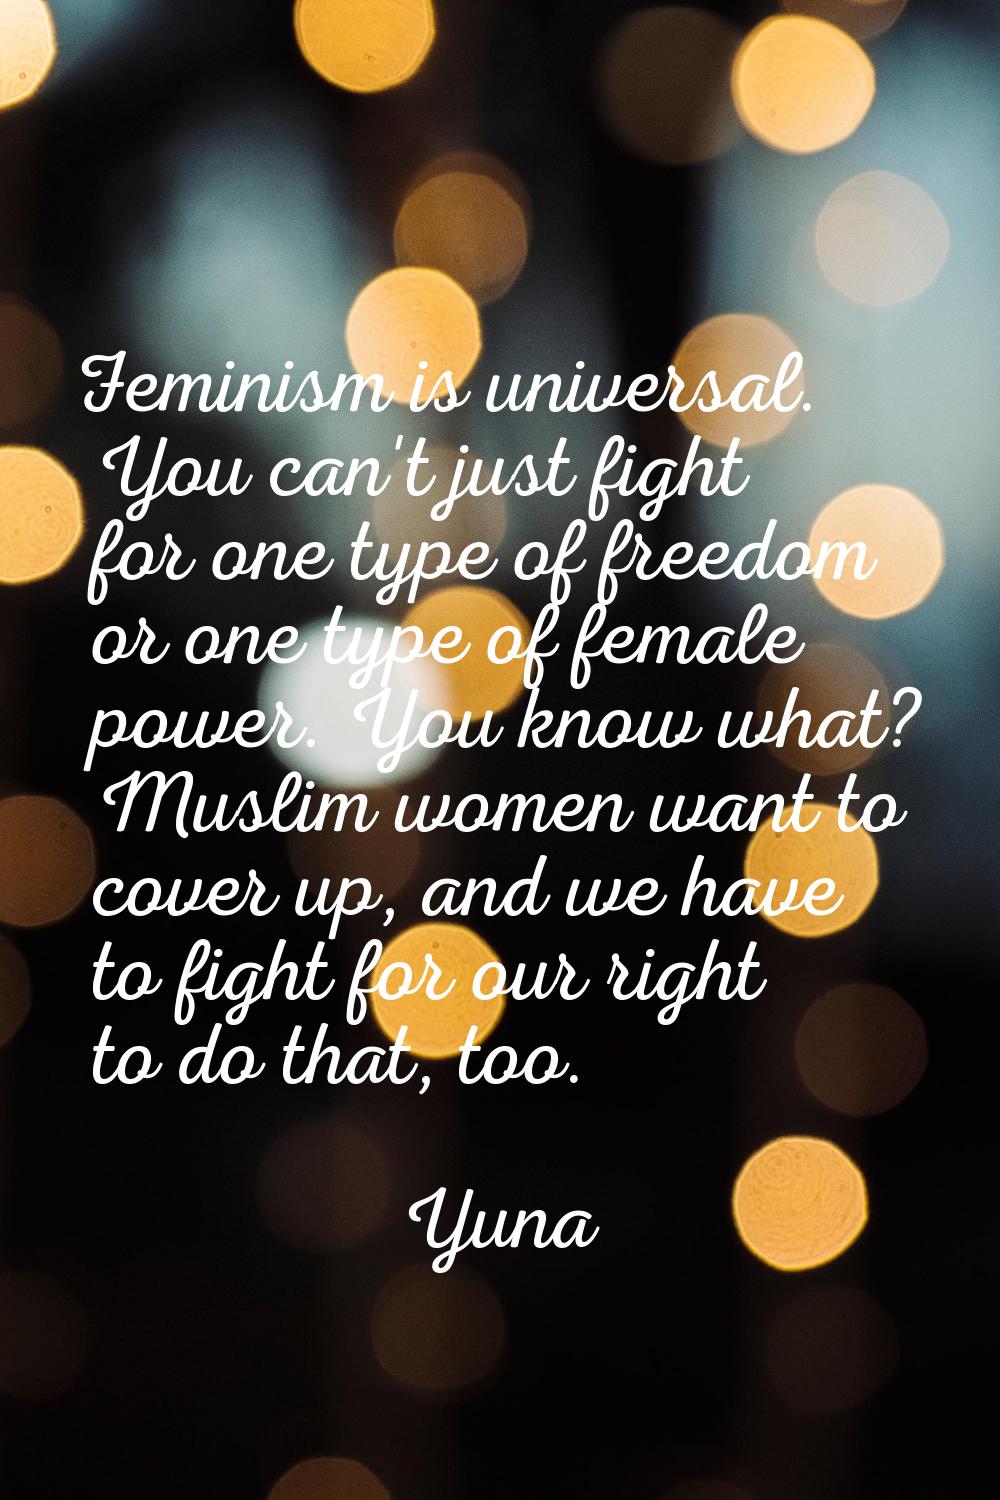 Feminism is universal. You can't just fight for one type of freedom or one type of female power. Yo